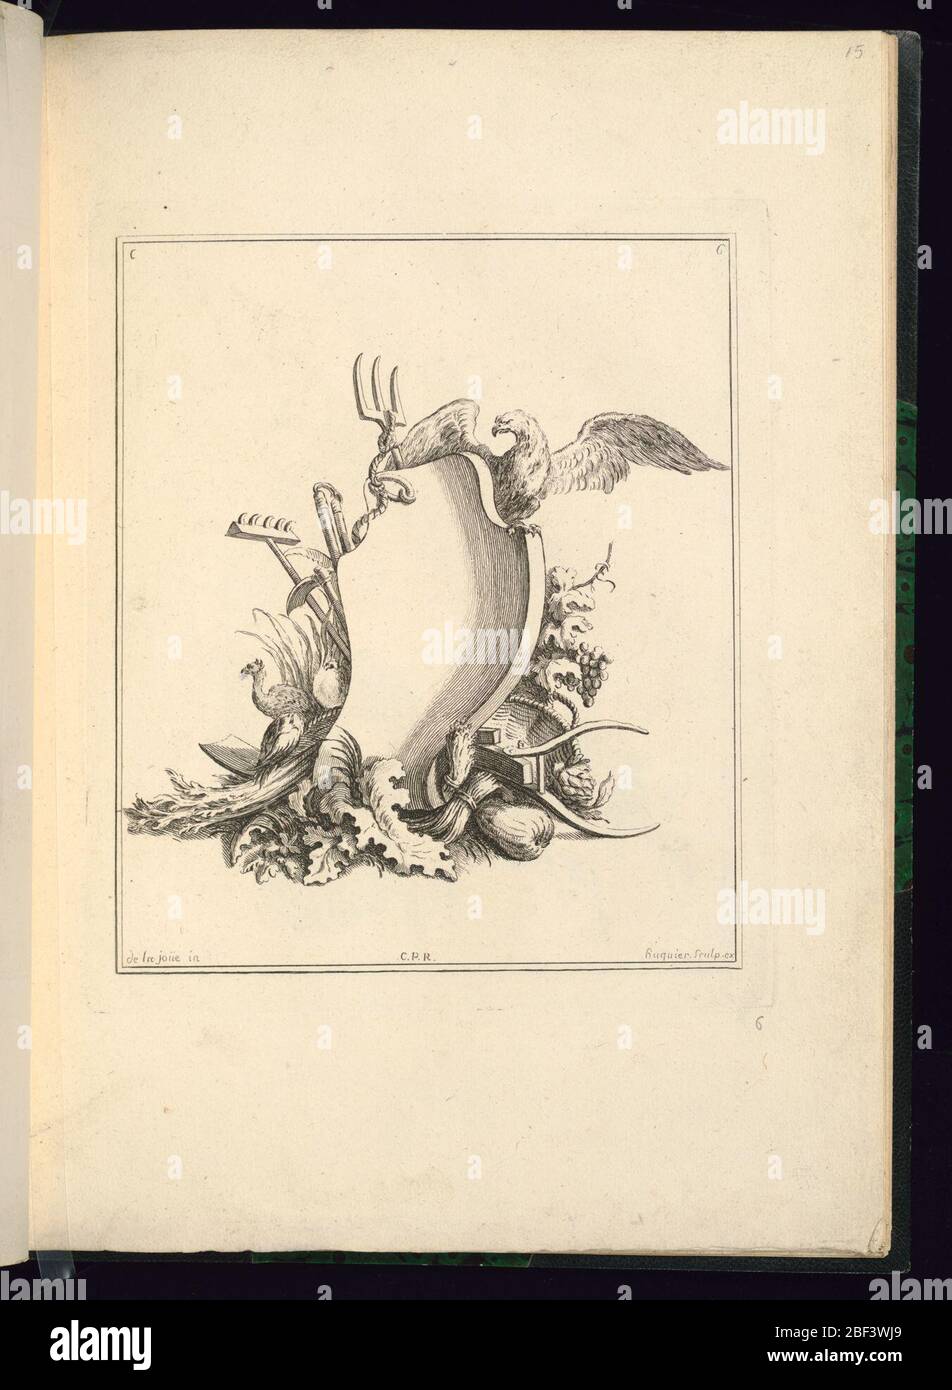 Design for a Cartouche Representing the Garden. Elongated asymmetrical cartouche decorated with tools of the garden: a rake, a hoe, a pitchfork, grapes, a shovel, gourds, sheaves of wheat, and leaves. A diabolical winged eagle surmounts the cartouche. Stock Photo